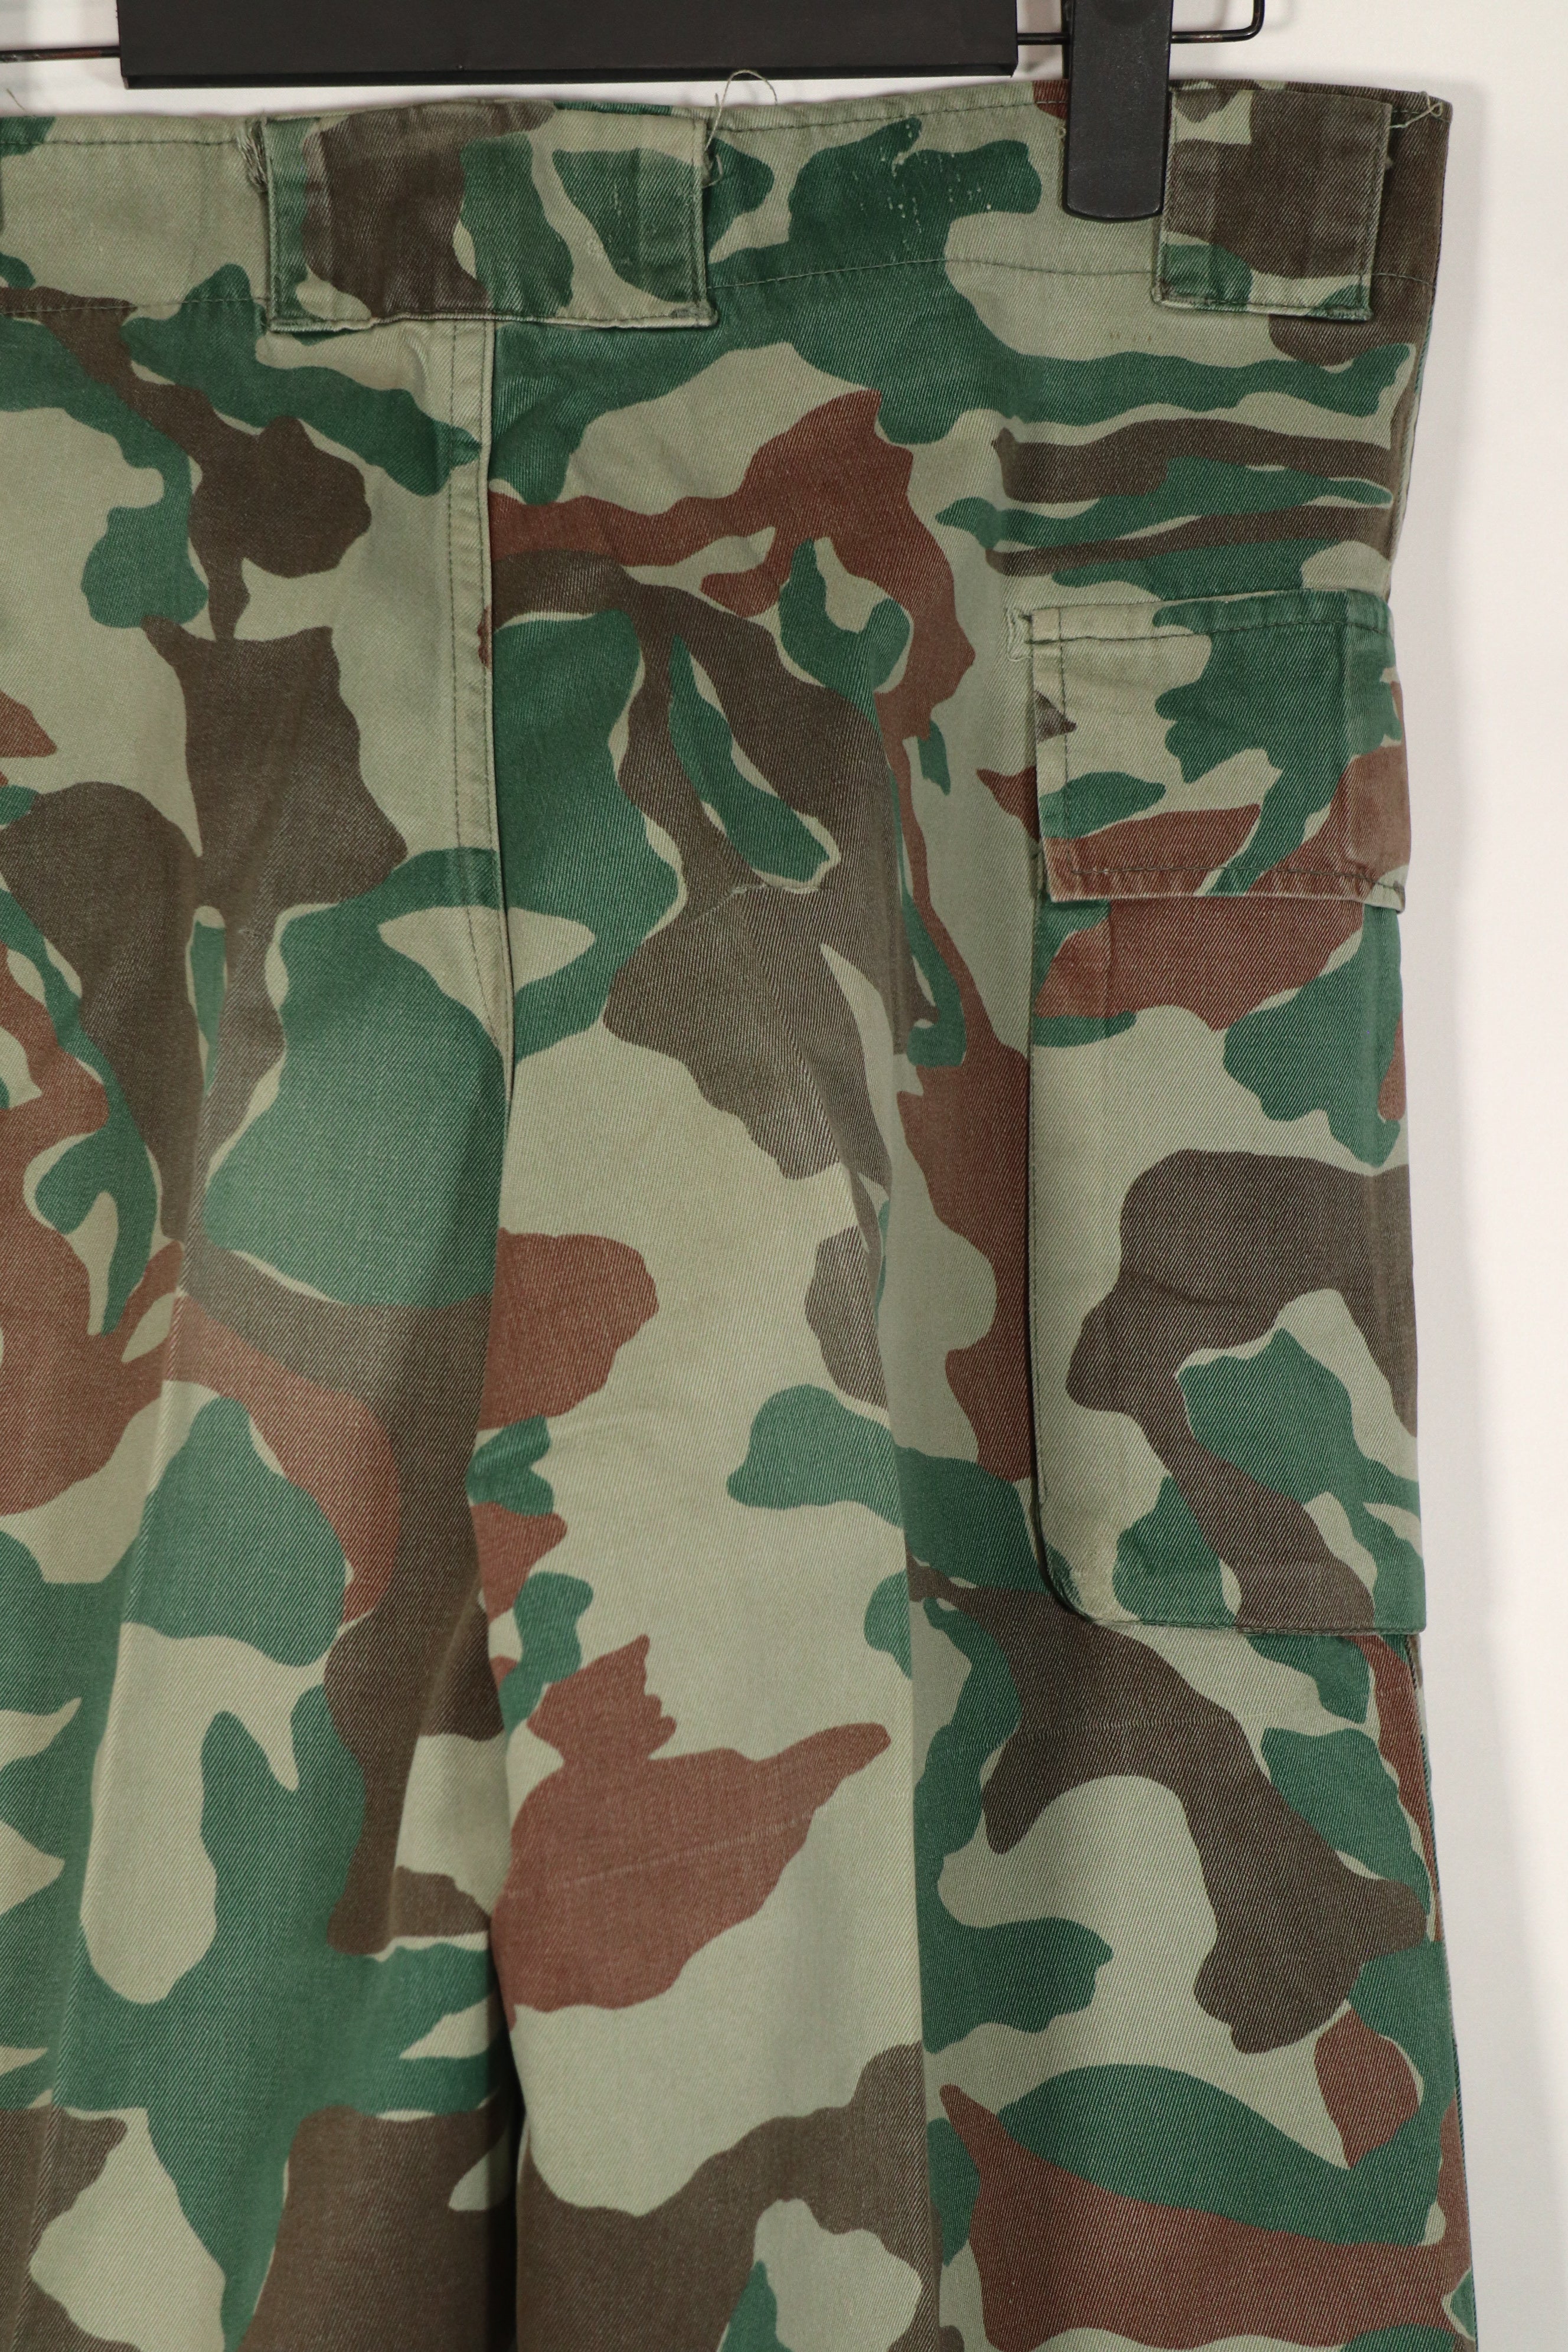 Real Japan Ground Self-Defense Force 1980's Kumazasa camouflage pants, used, scratches.